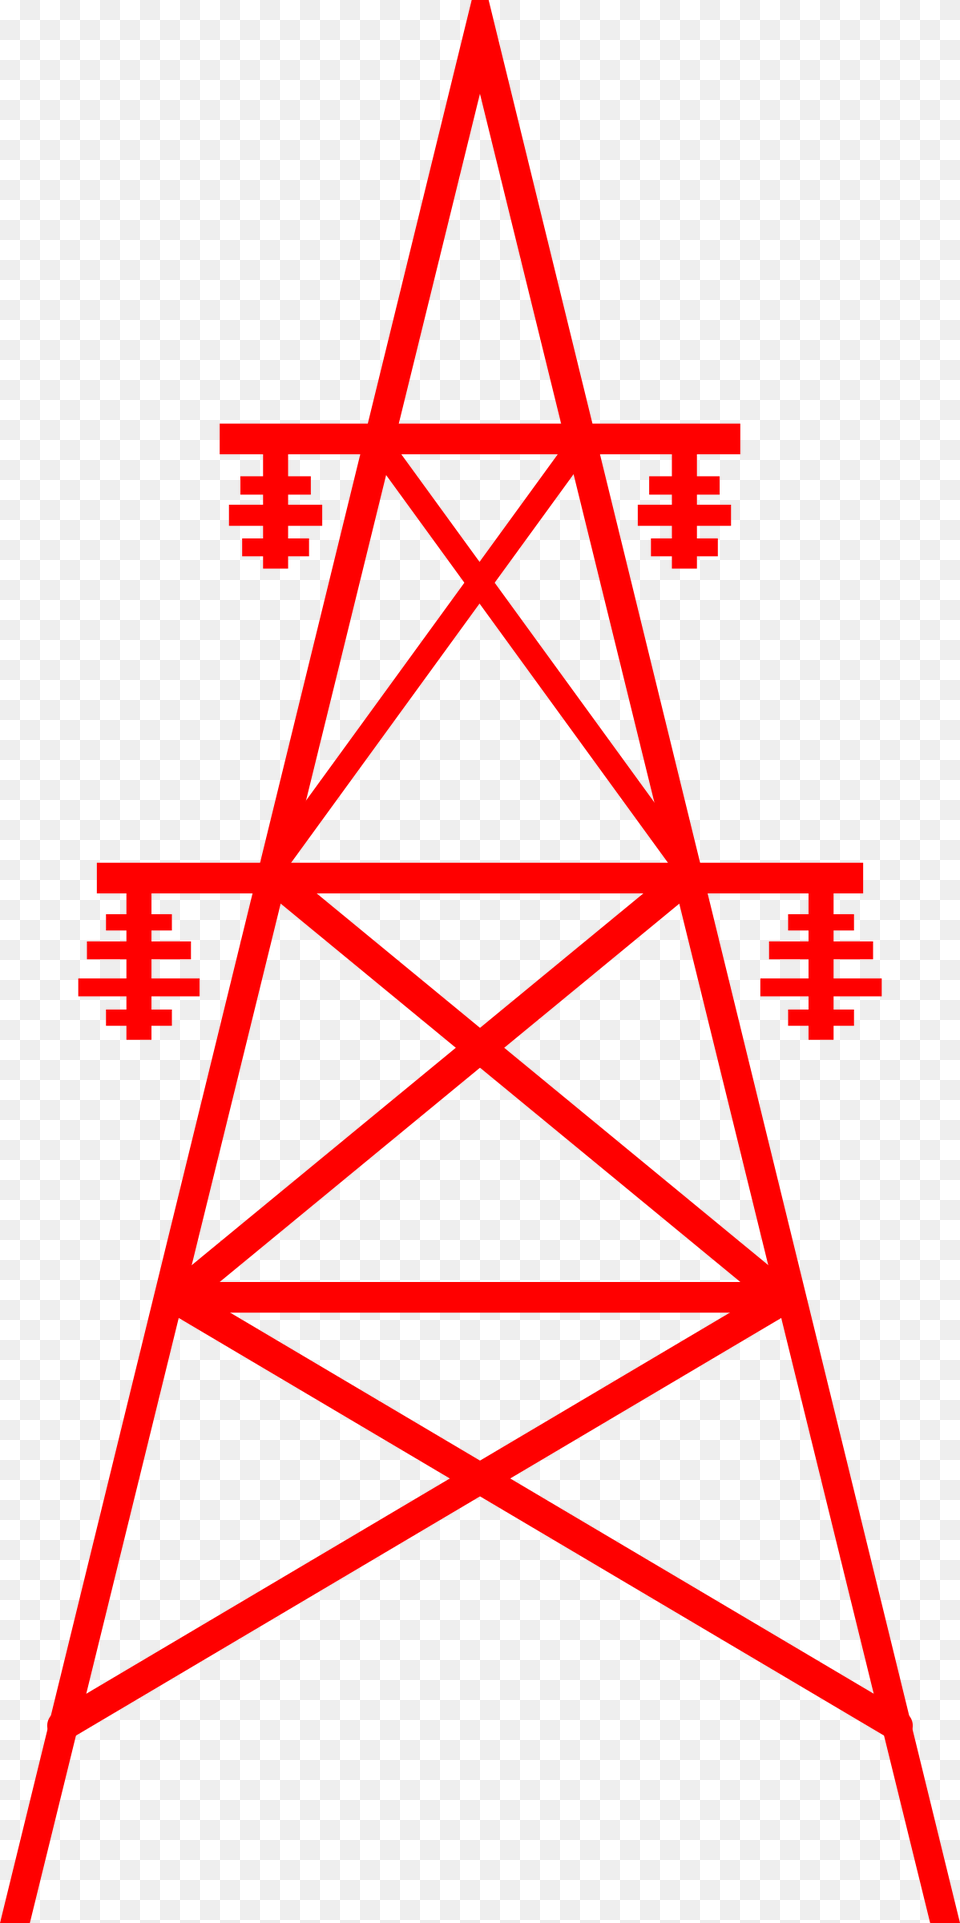 Transmission Tower Icons, Triangle, Cable, Power Lines, Electric Transmission Tower Free Png Download